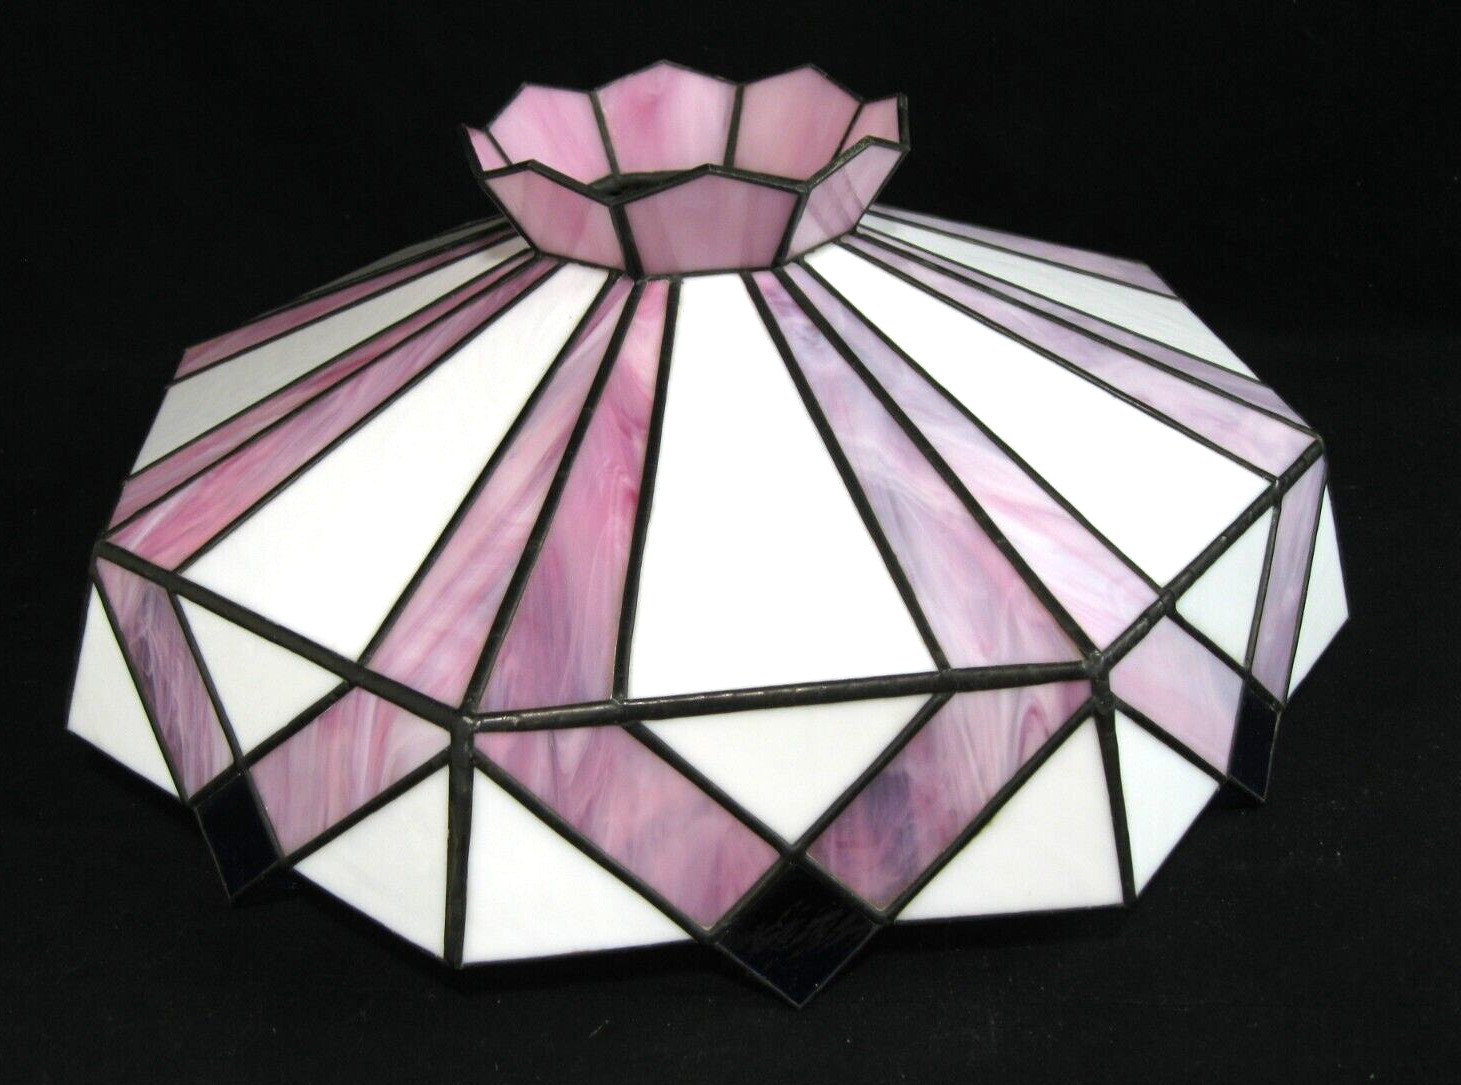 Large Vintage Stained Glass Hanging Lamp Shade Pinkish & White Strips Blue tips